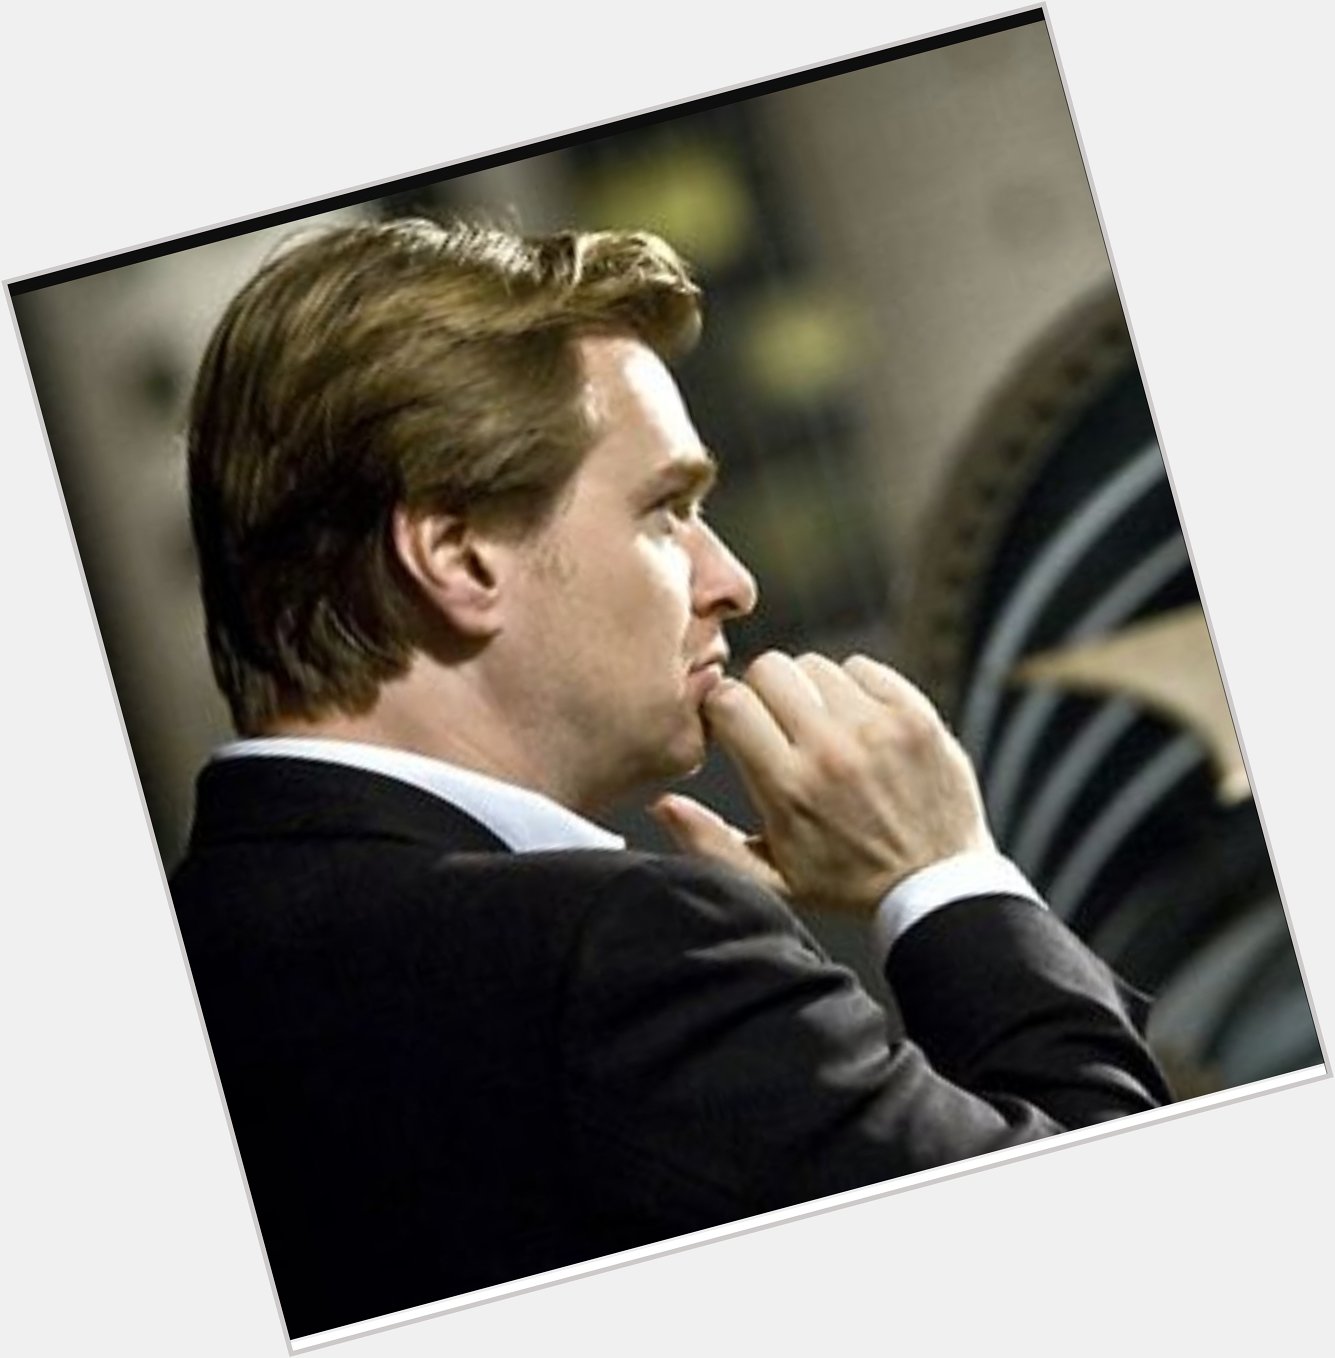 Wish you a very happy birthday Christopher Nolan. May you live long and healthy to create magical cinema. 